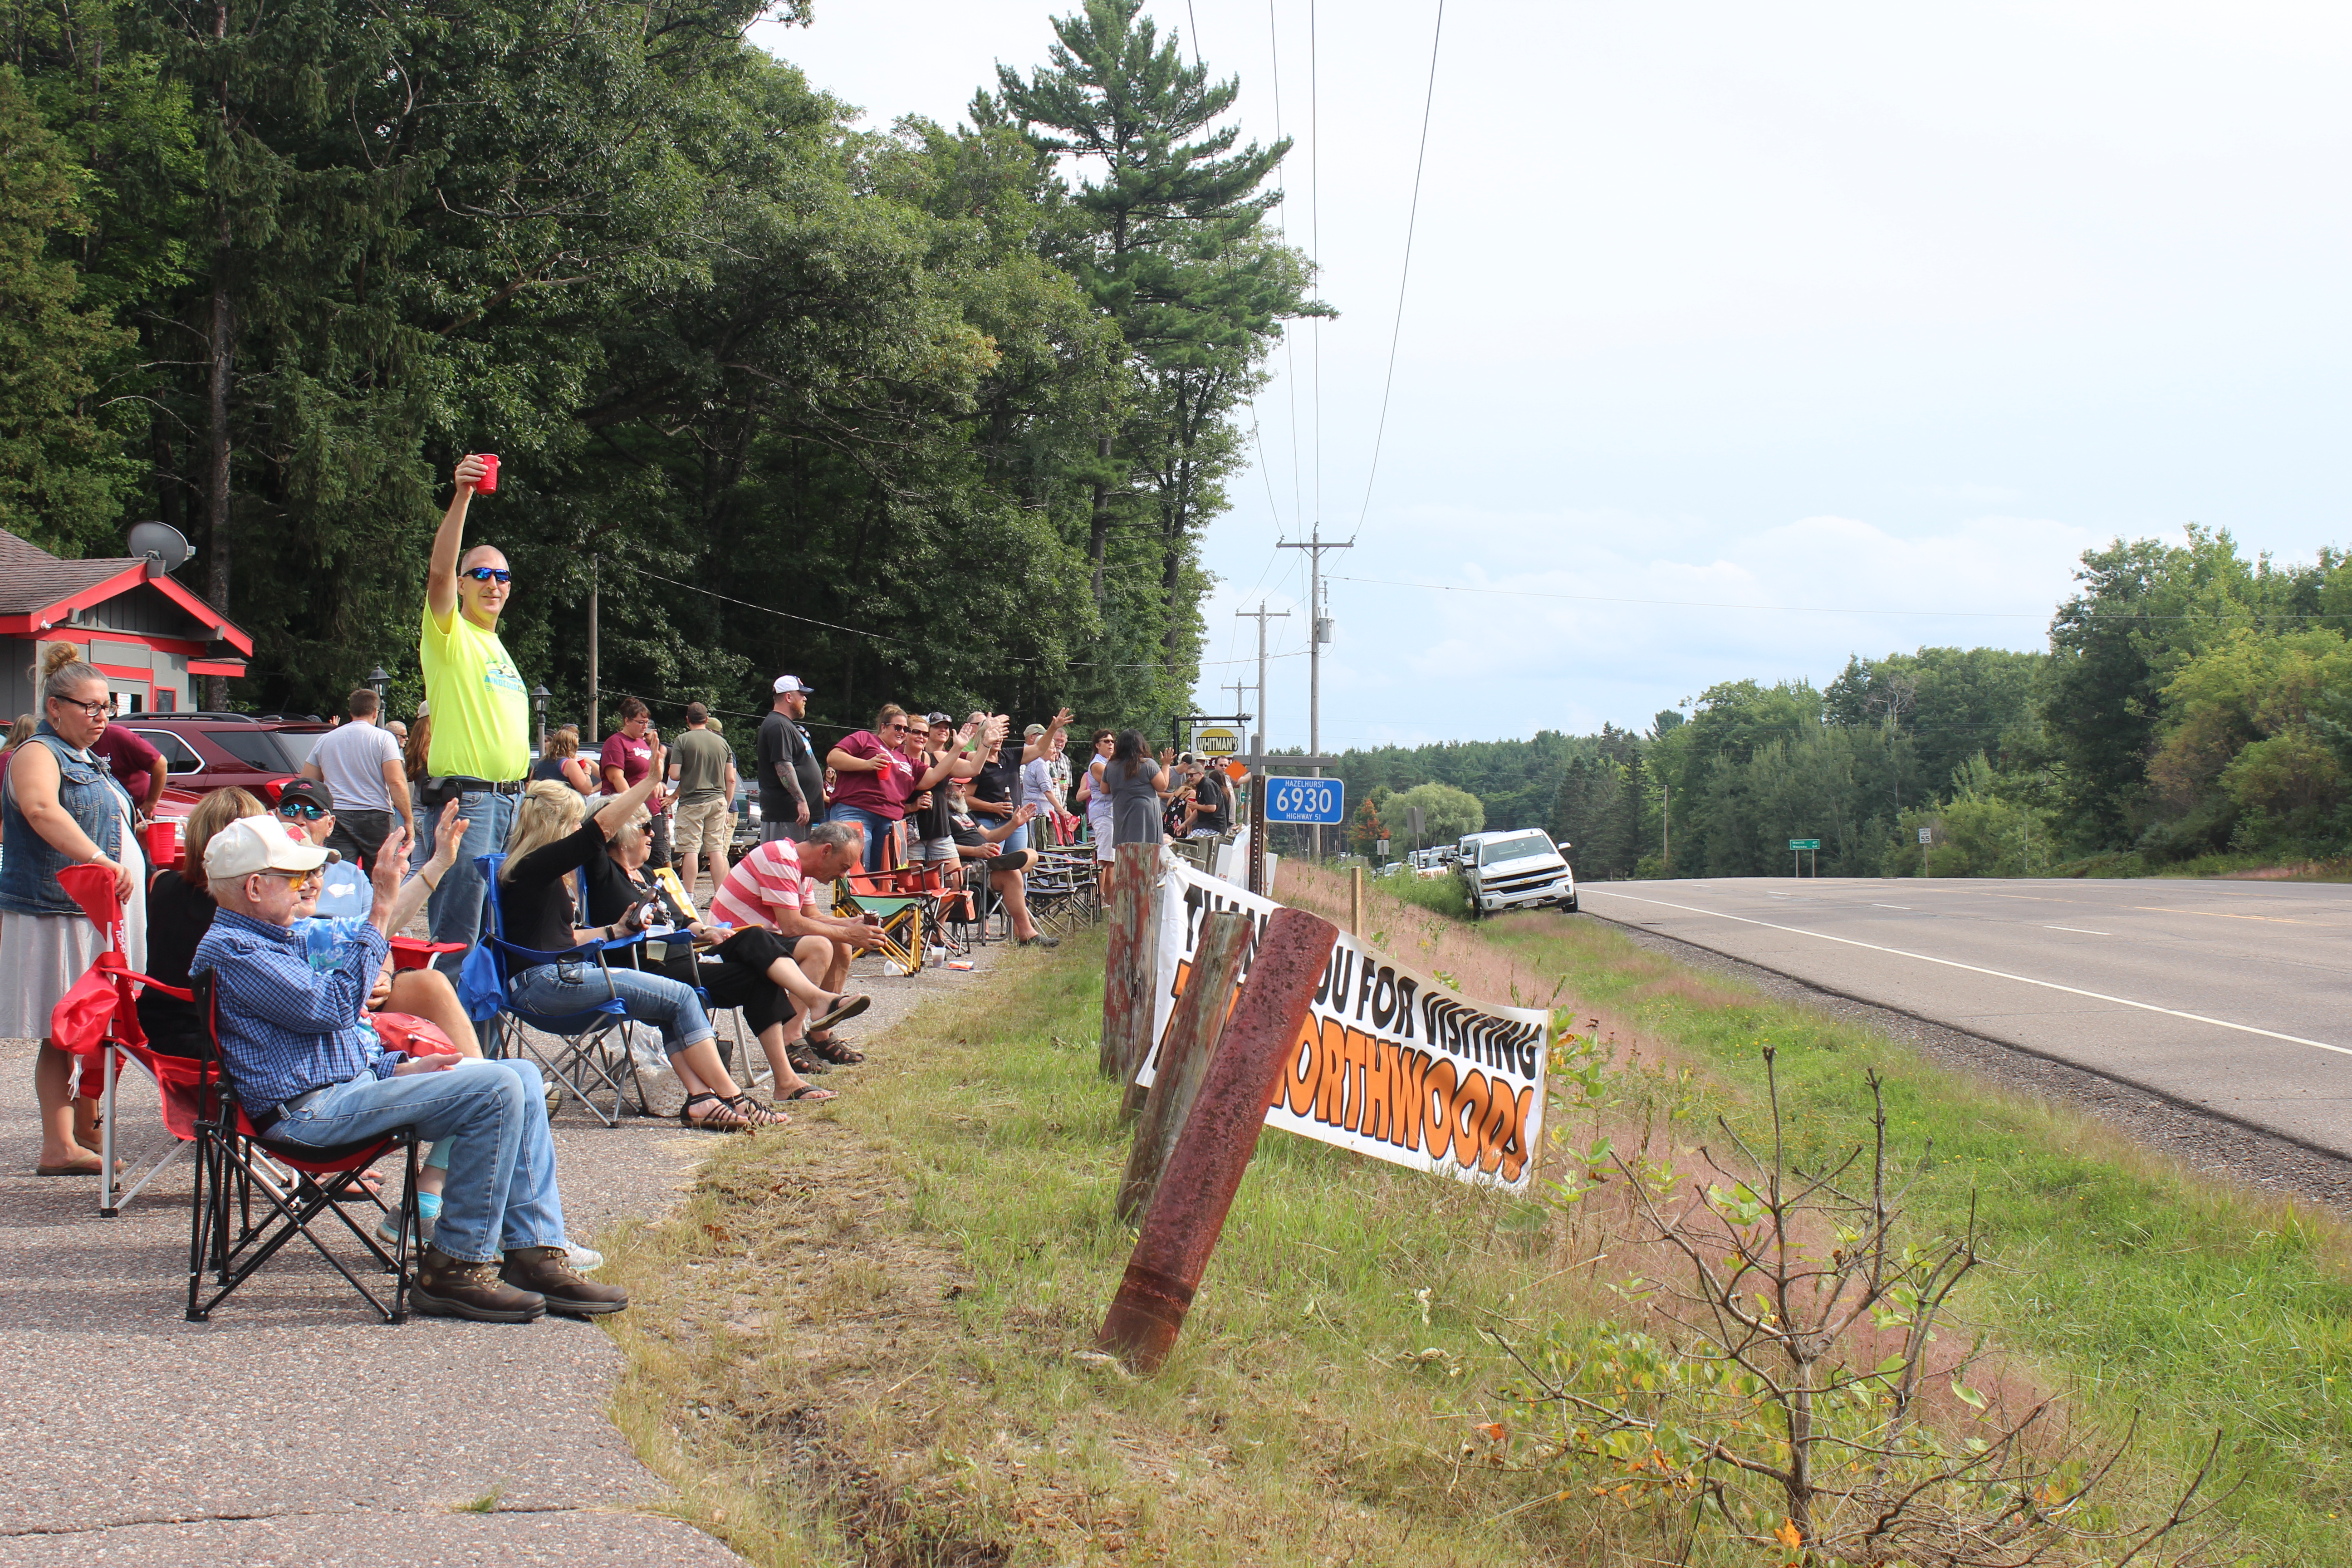 People wave good-bye to tourists at Whitman's Bar & Grill in Hazelhurst, WI.